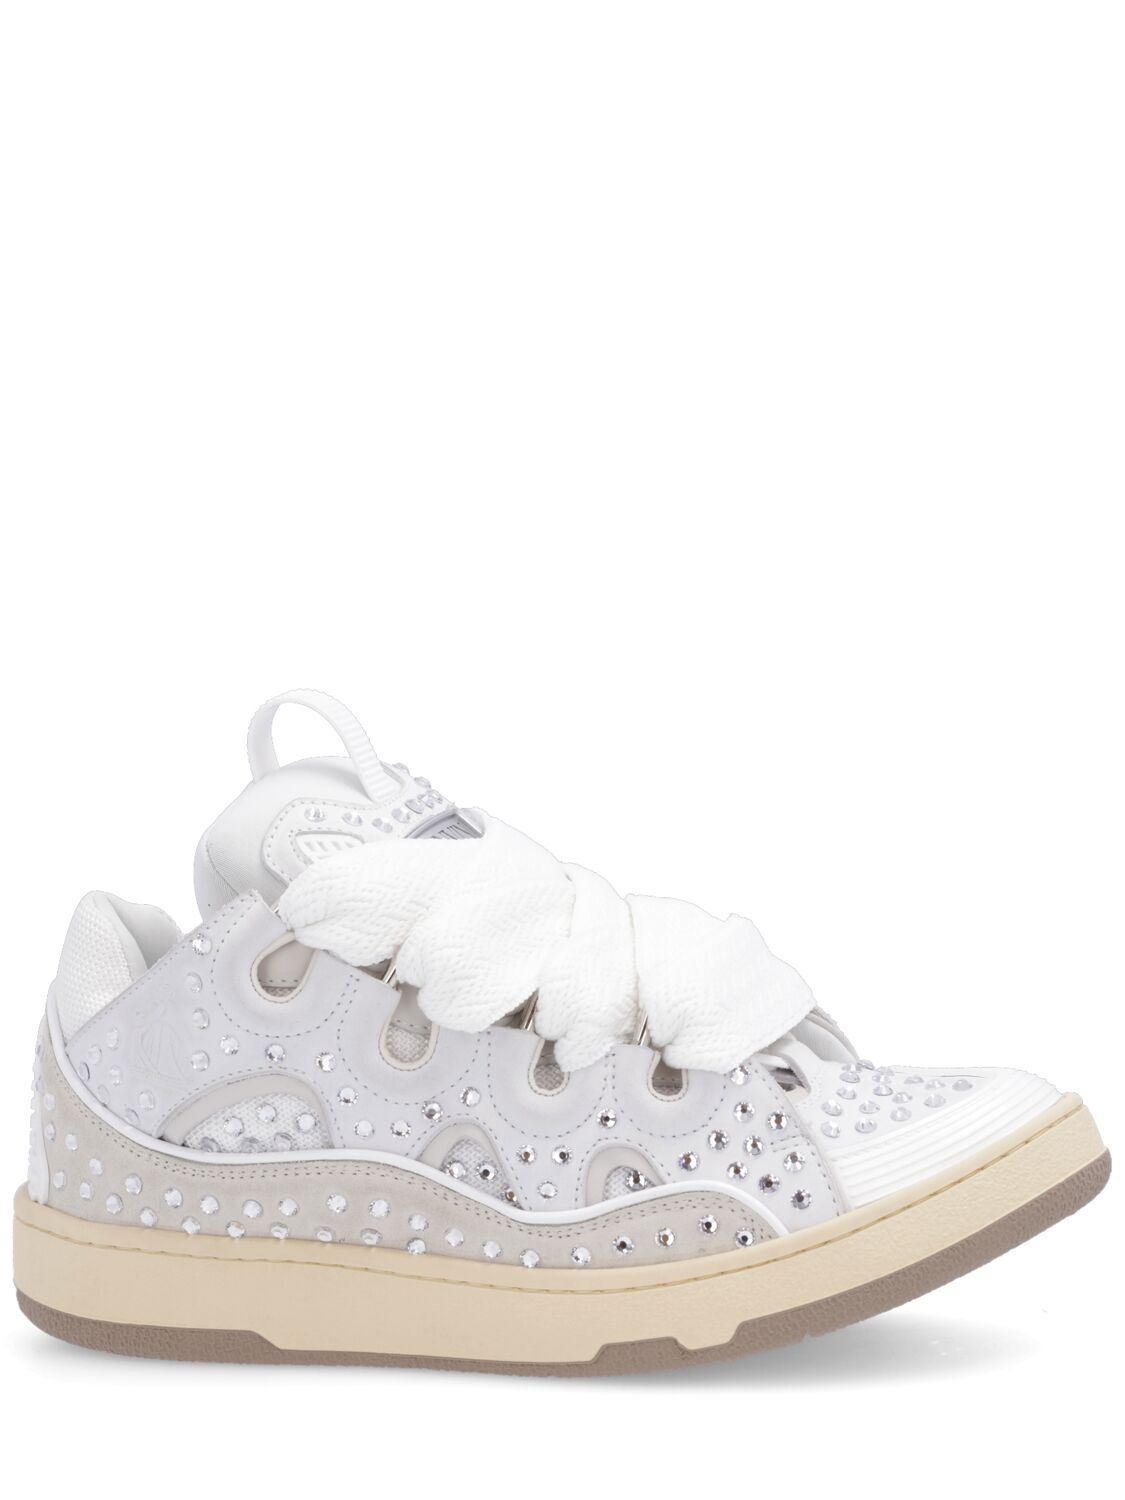 Image of Curb Embellished Leather Sneakers